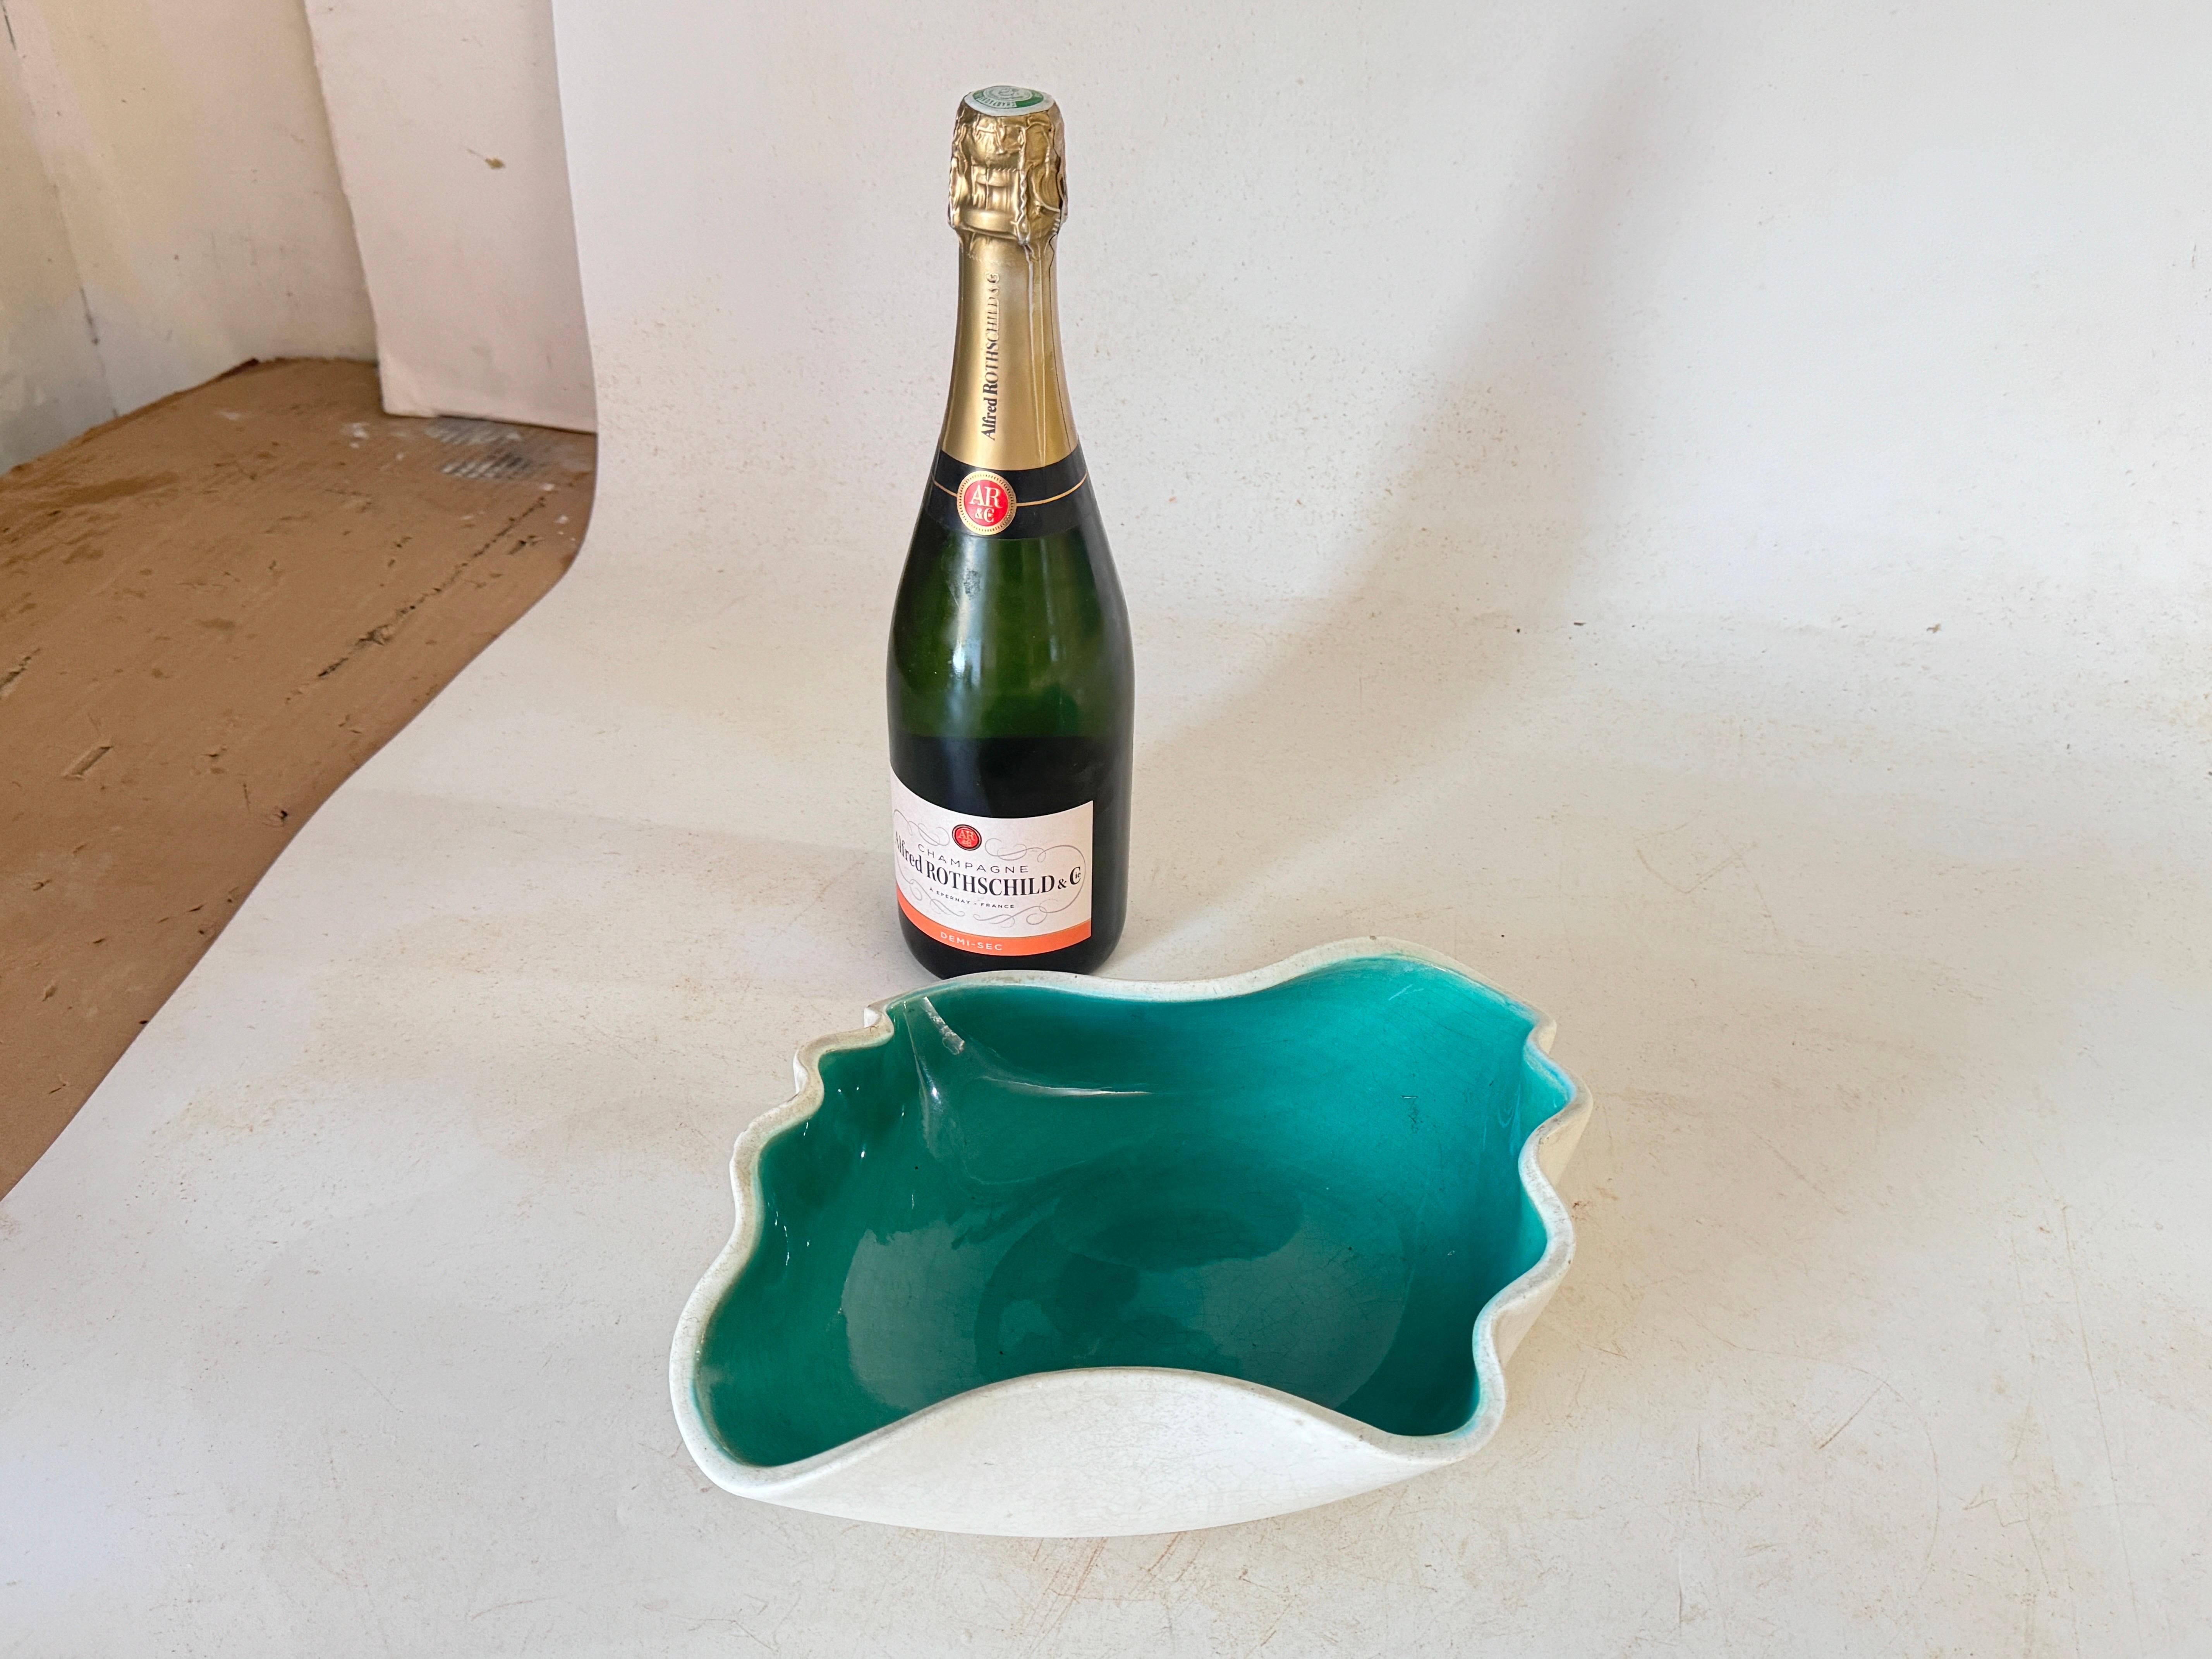 Mid-Century French Decorative Ceramic Dish / Vide-Poche by Elchinger 1960s.
Green Color.